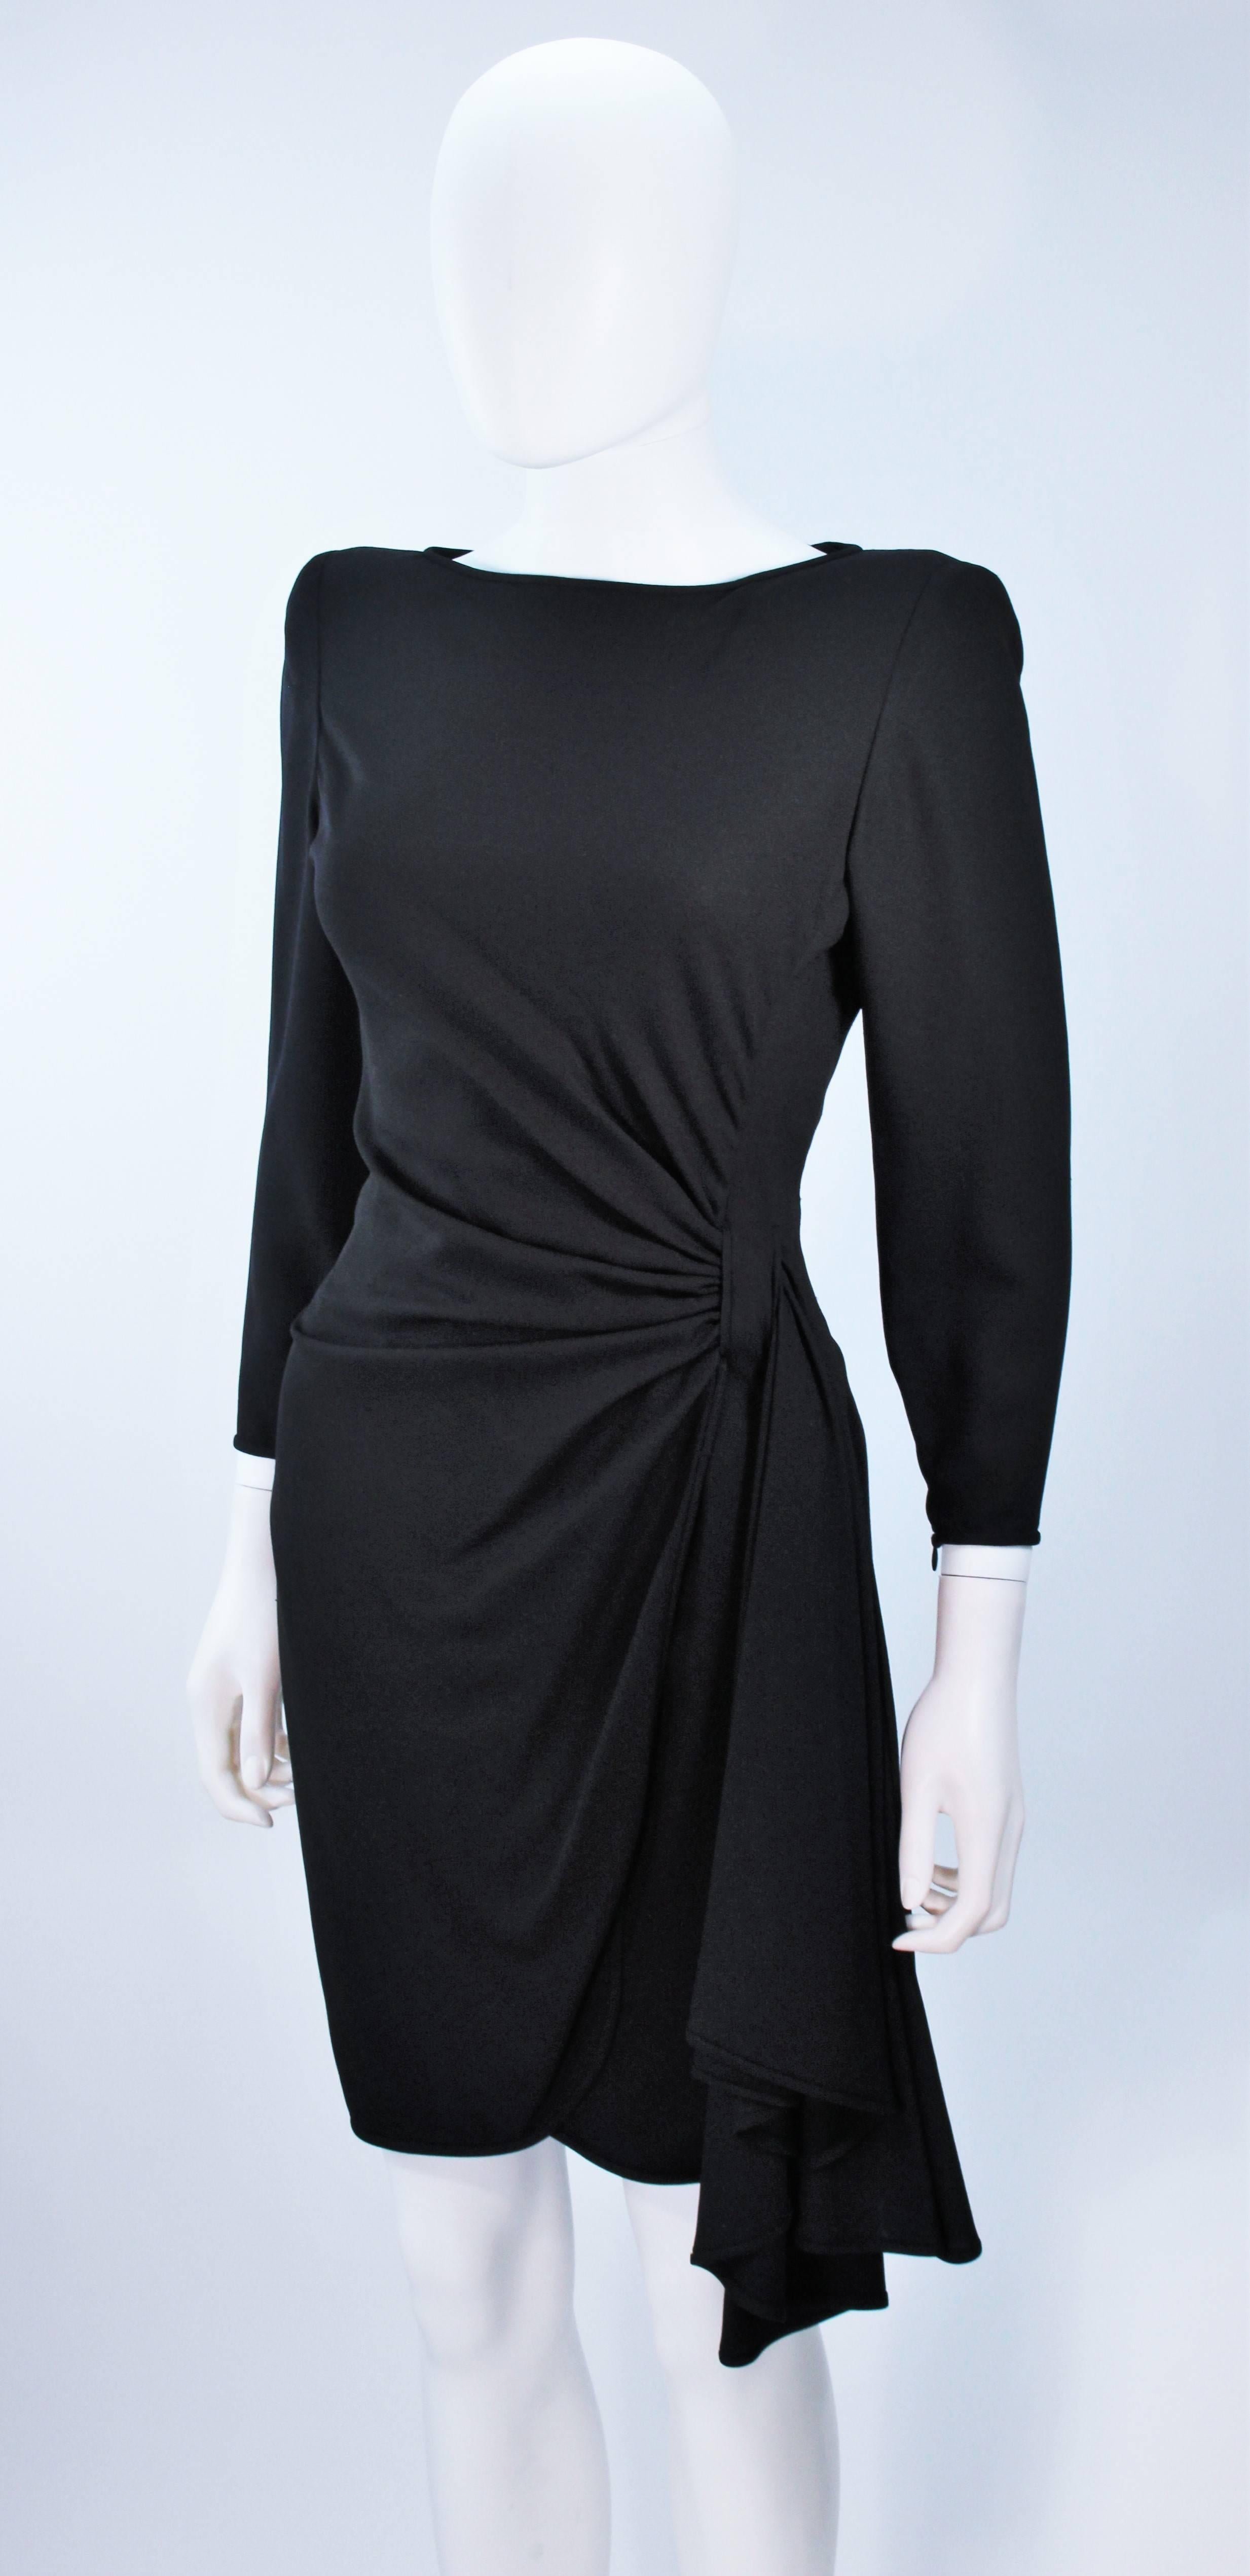 Women's VALENTINO 1980'S Black Draped Cocktail Dress Size 6-8 For Sale